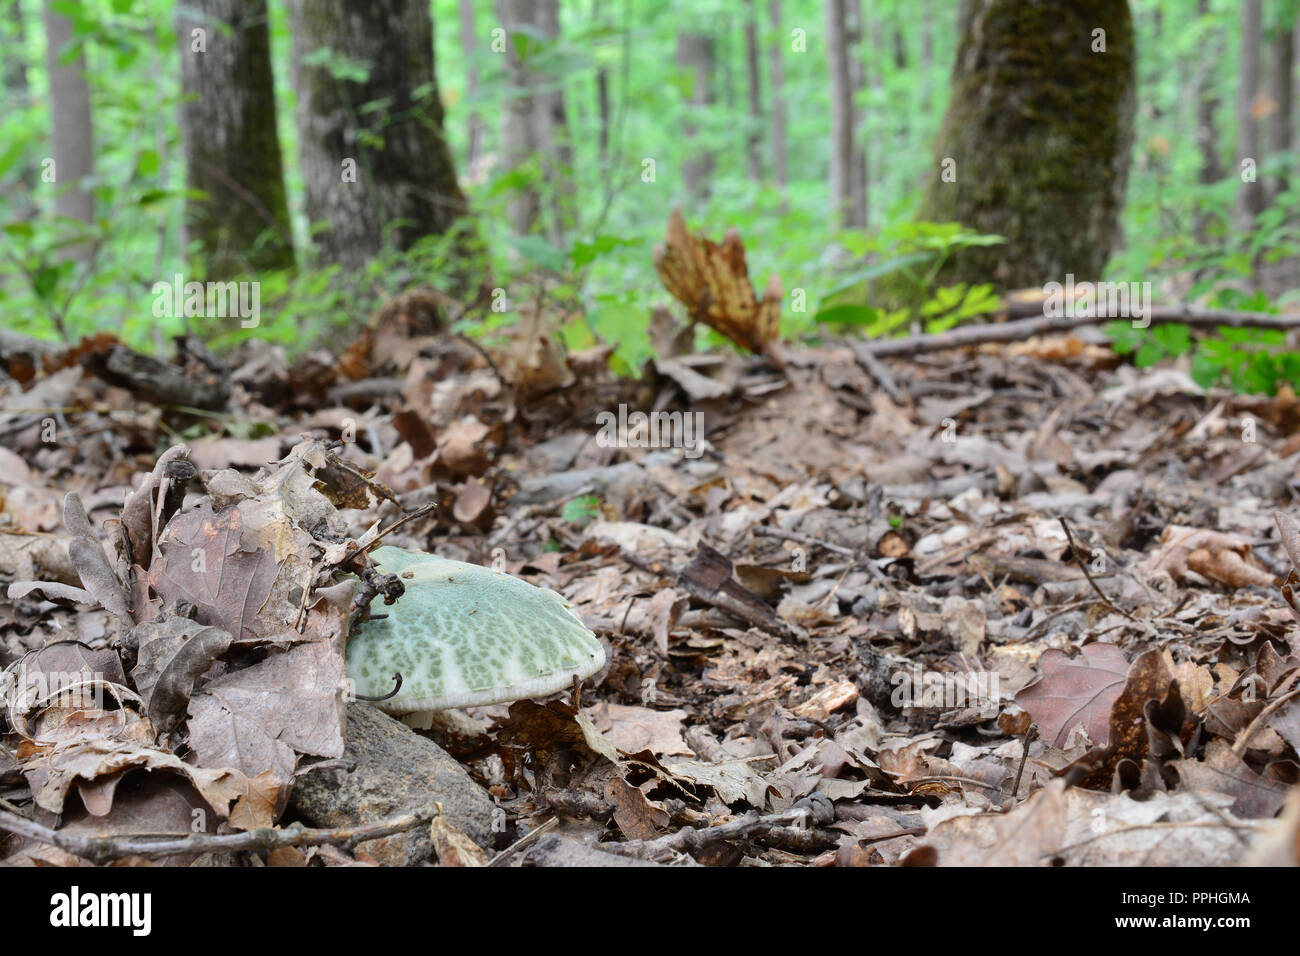 Young, healthy specimen of Russula virescens or Greencracked Brittlegill mushroom half hidden under the leaves in old oak forest Stock Photo